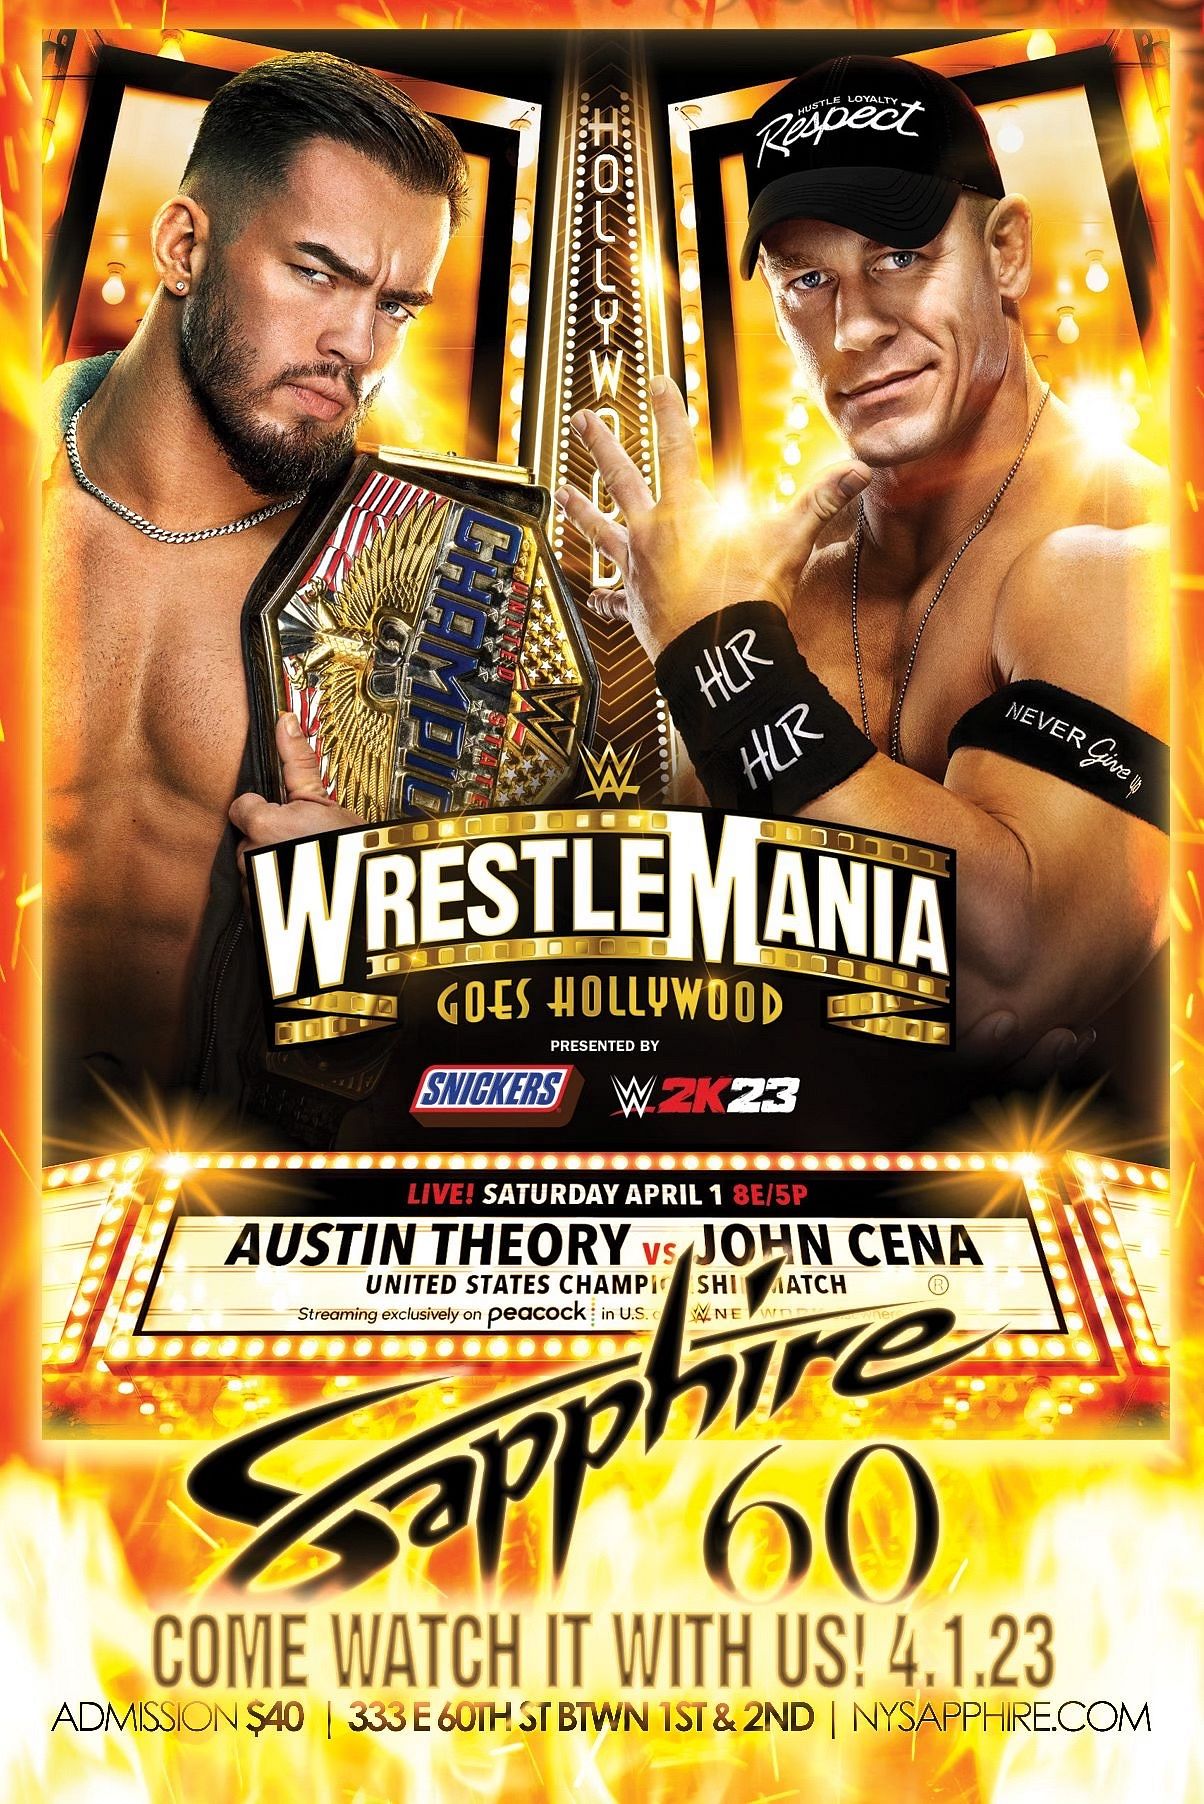 WrestleMania 37 date, start time, card, matches, live stream and